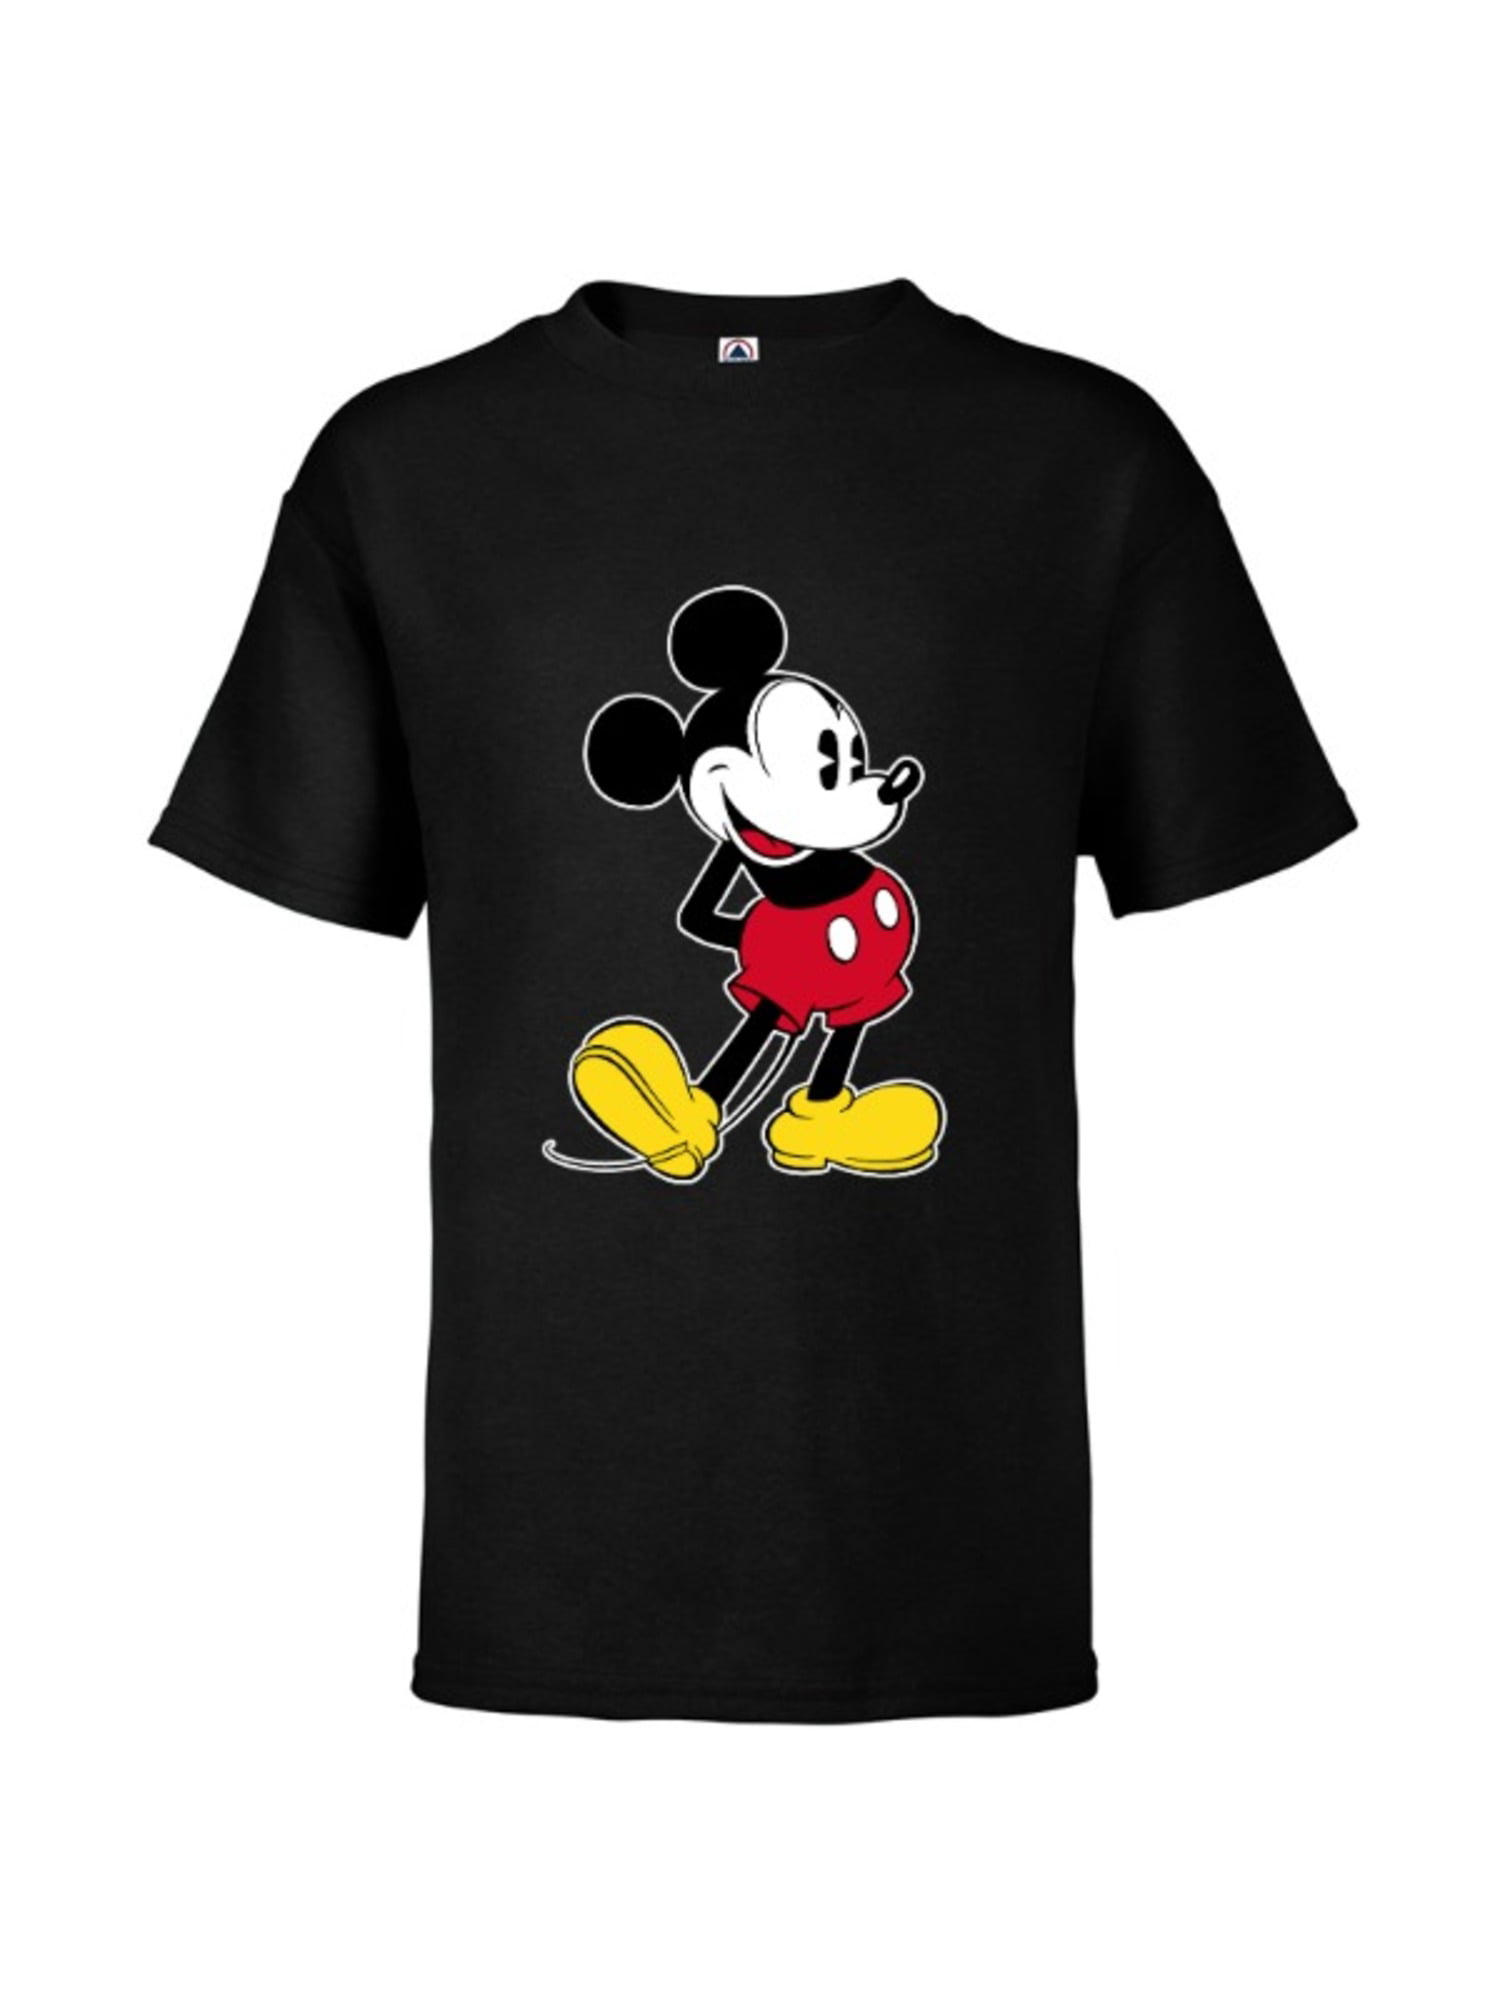 Disney Youth Boys T Shirt Tee Top Mickey Mouse Big Face Black Size 3T 